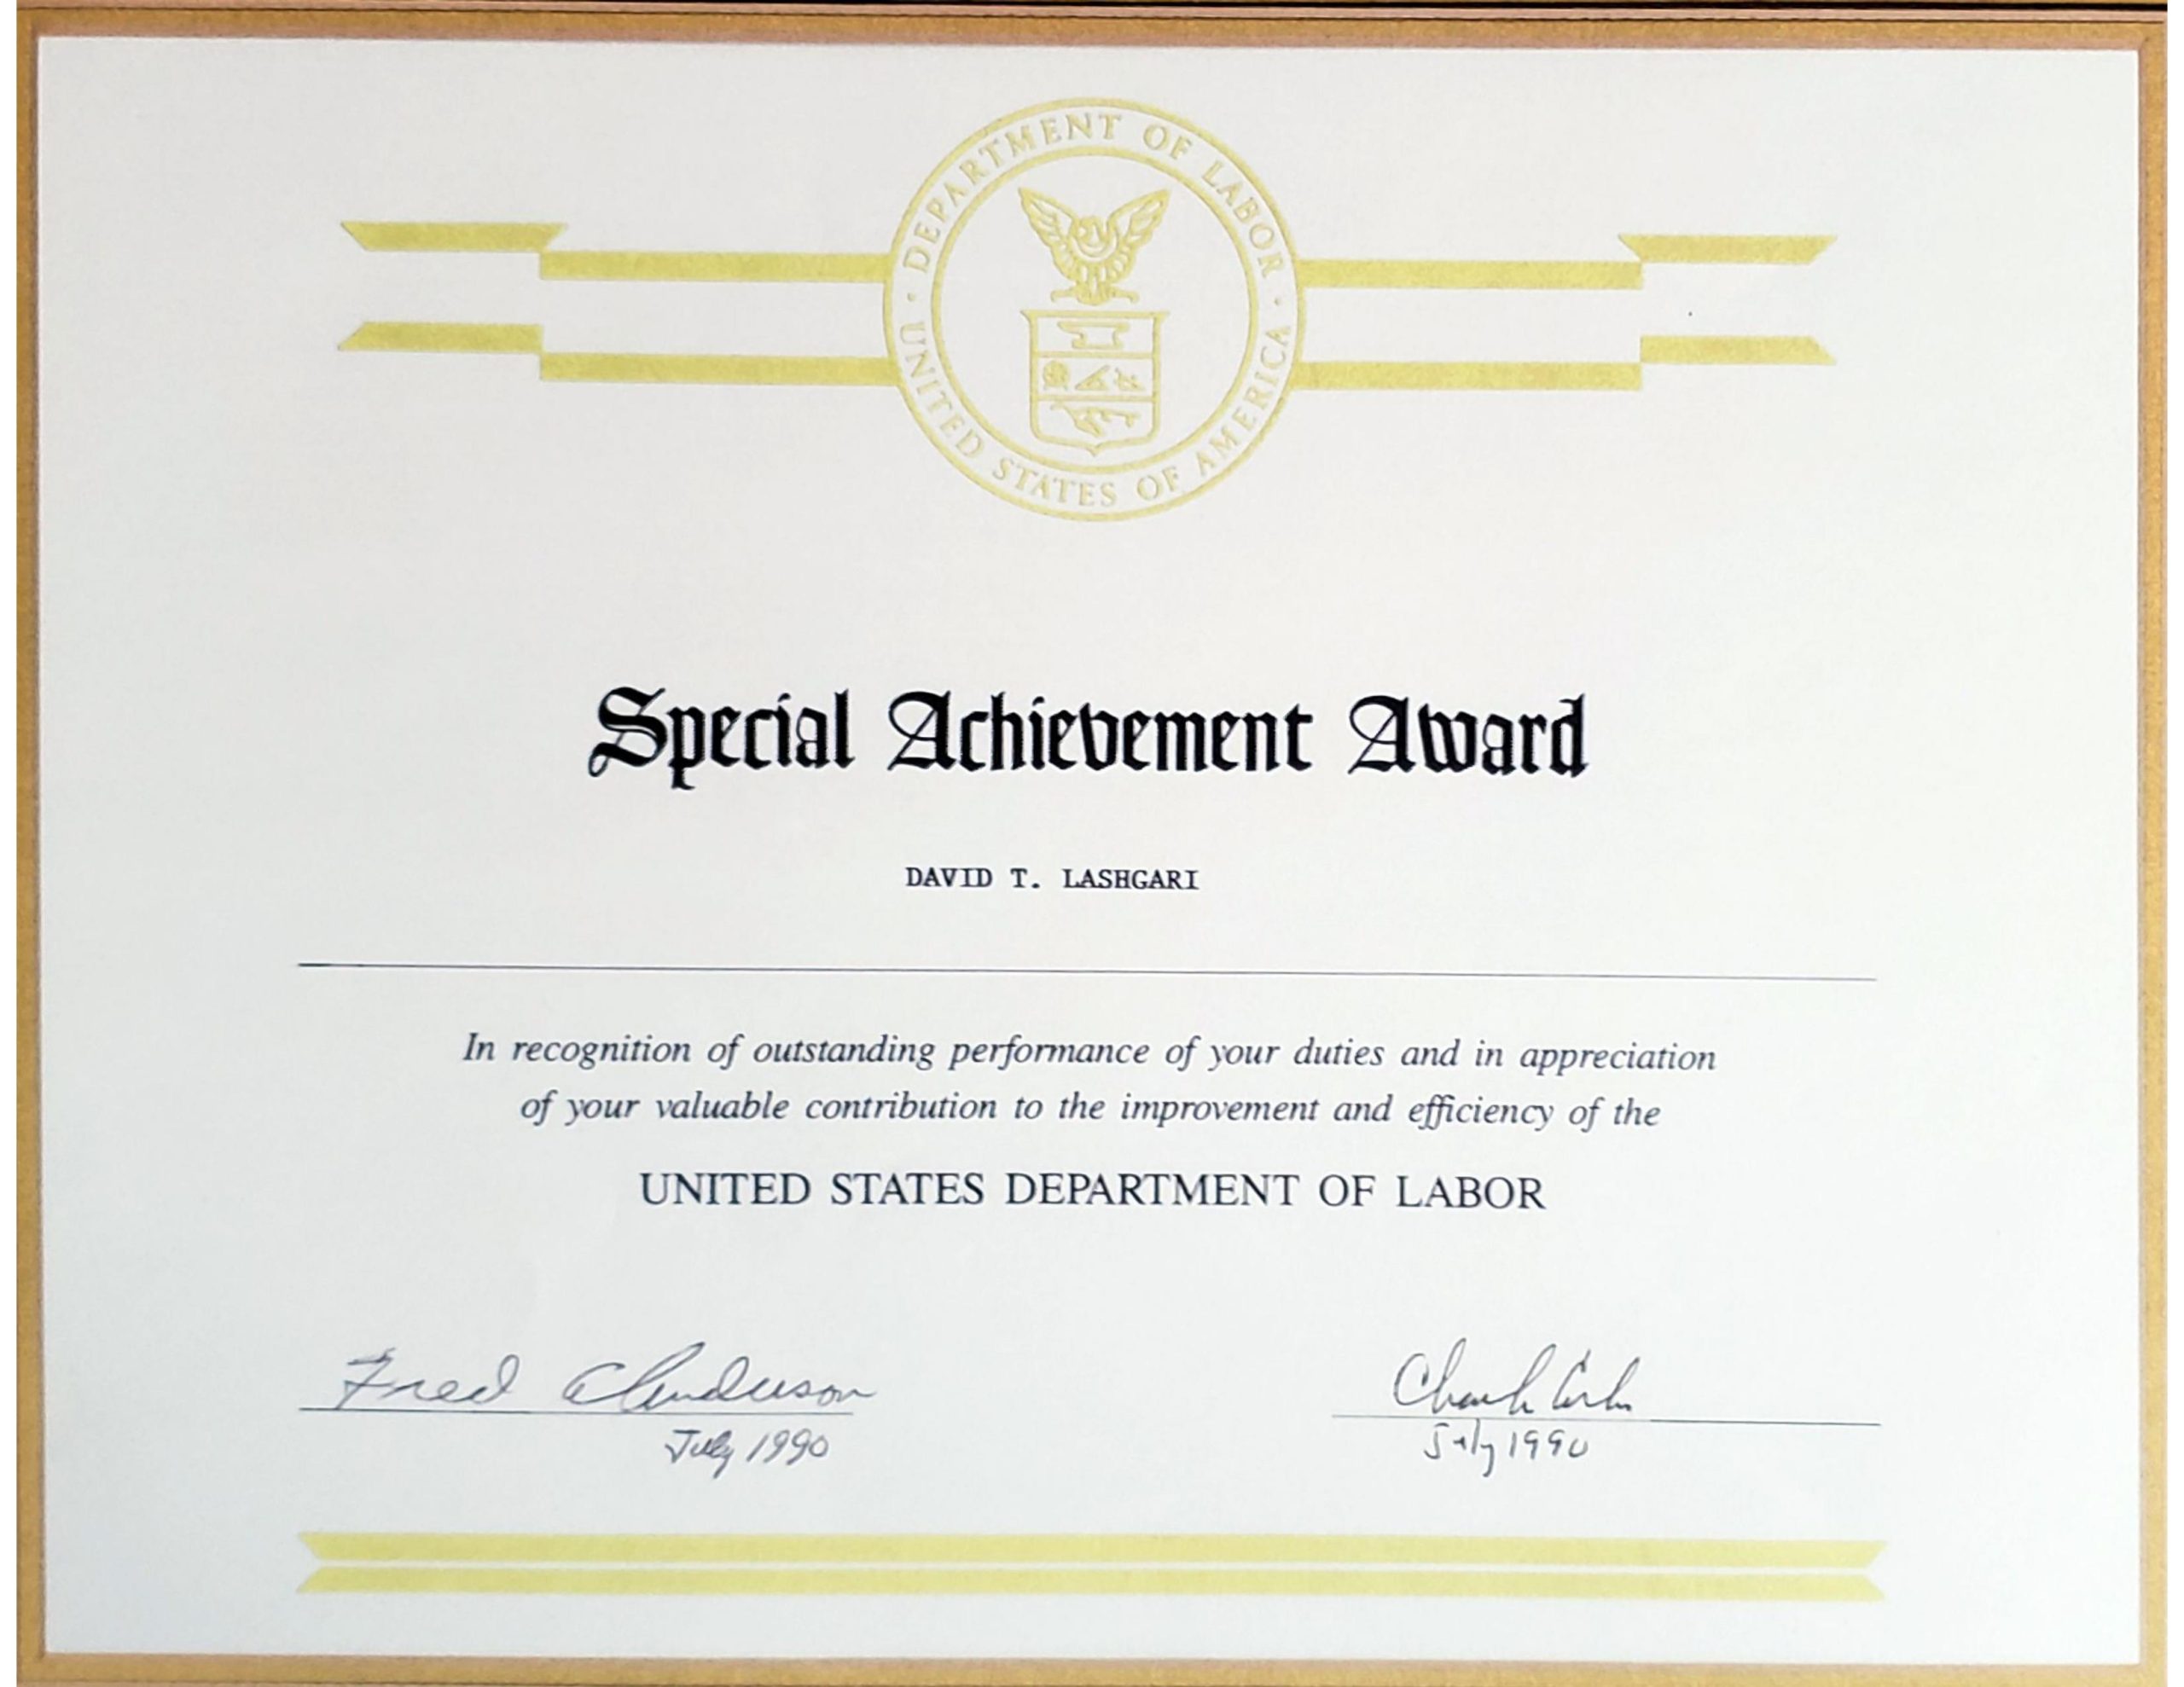 United States Department of Labor Special Achievement Award, outstanding performance